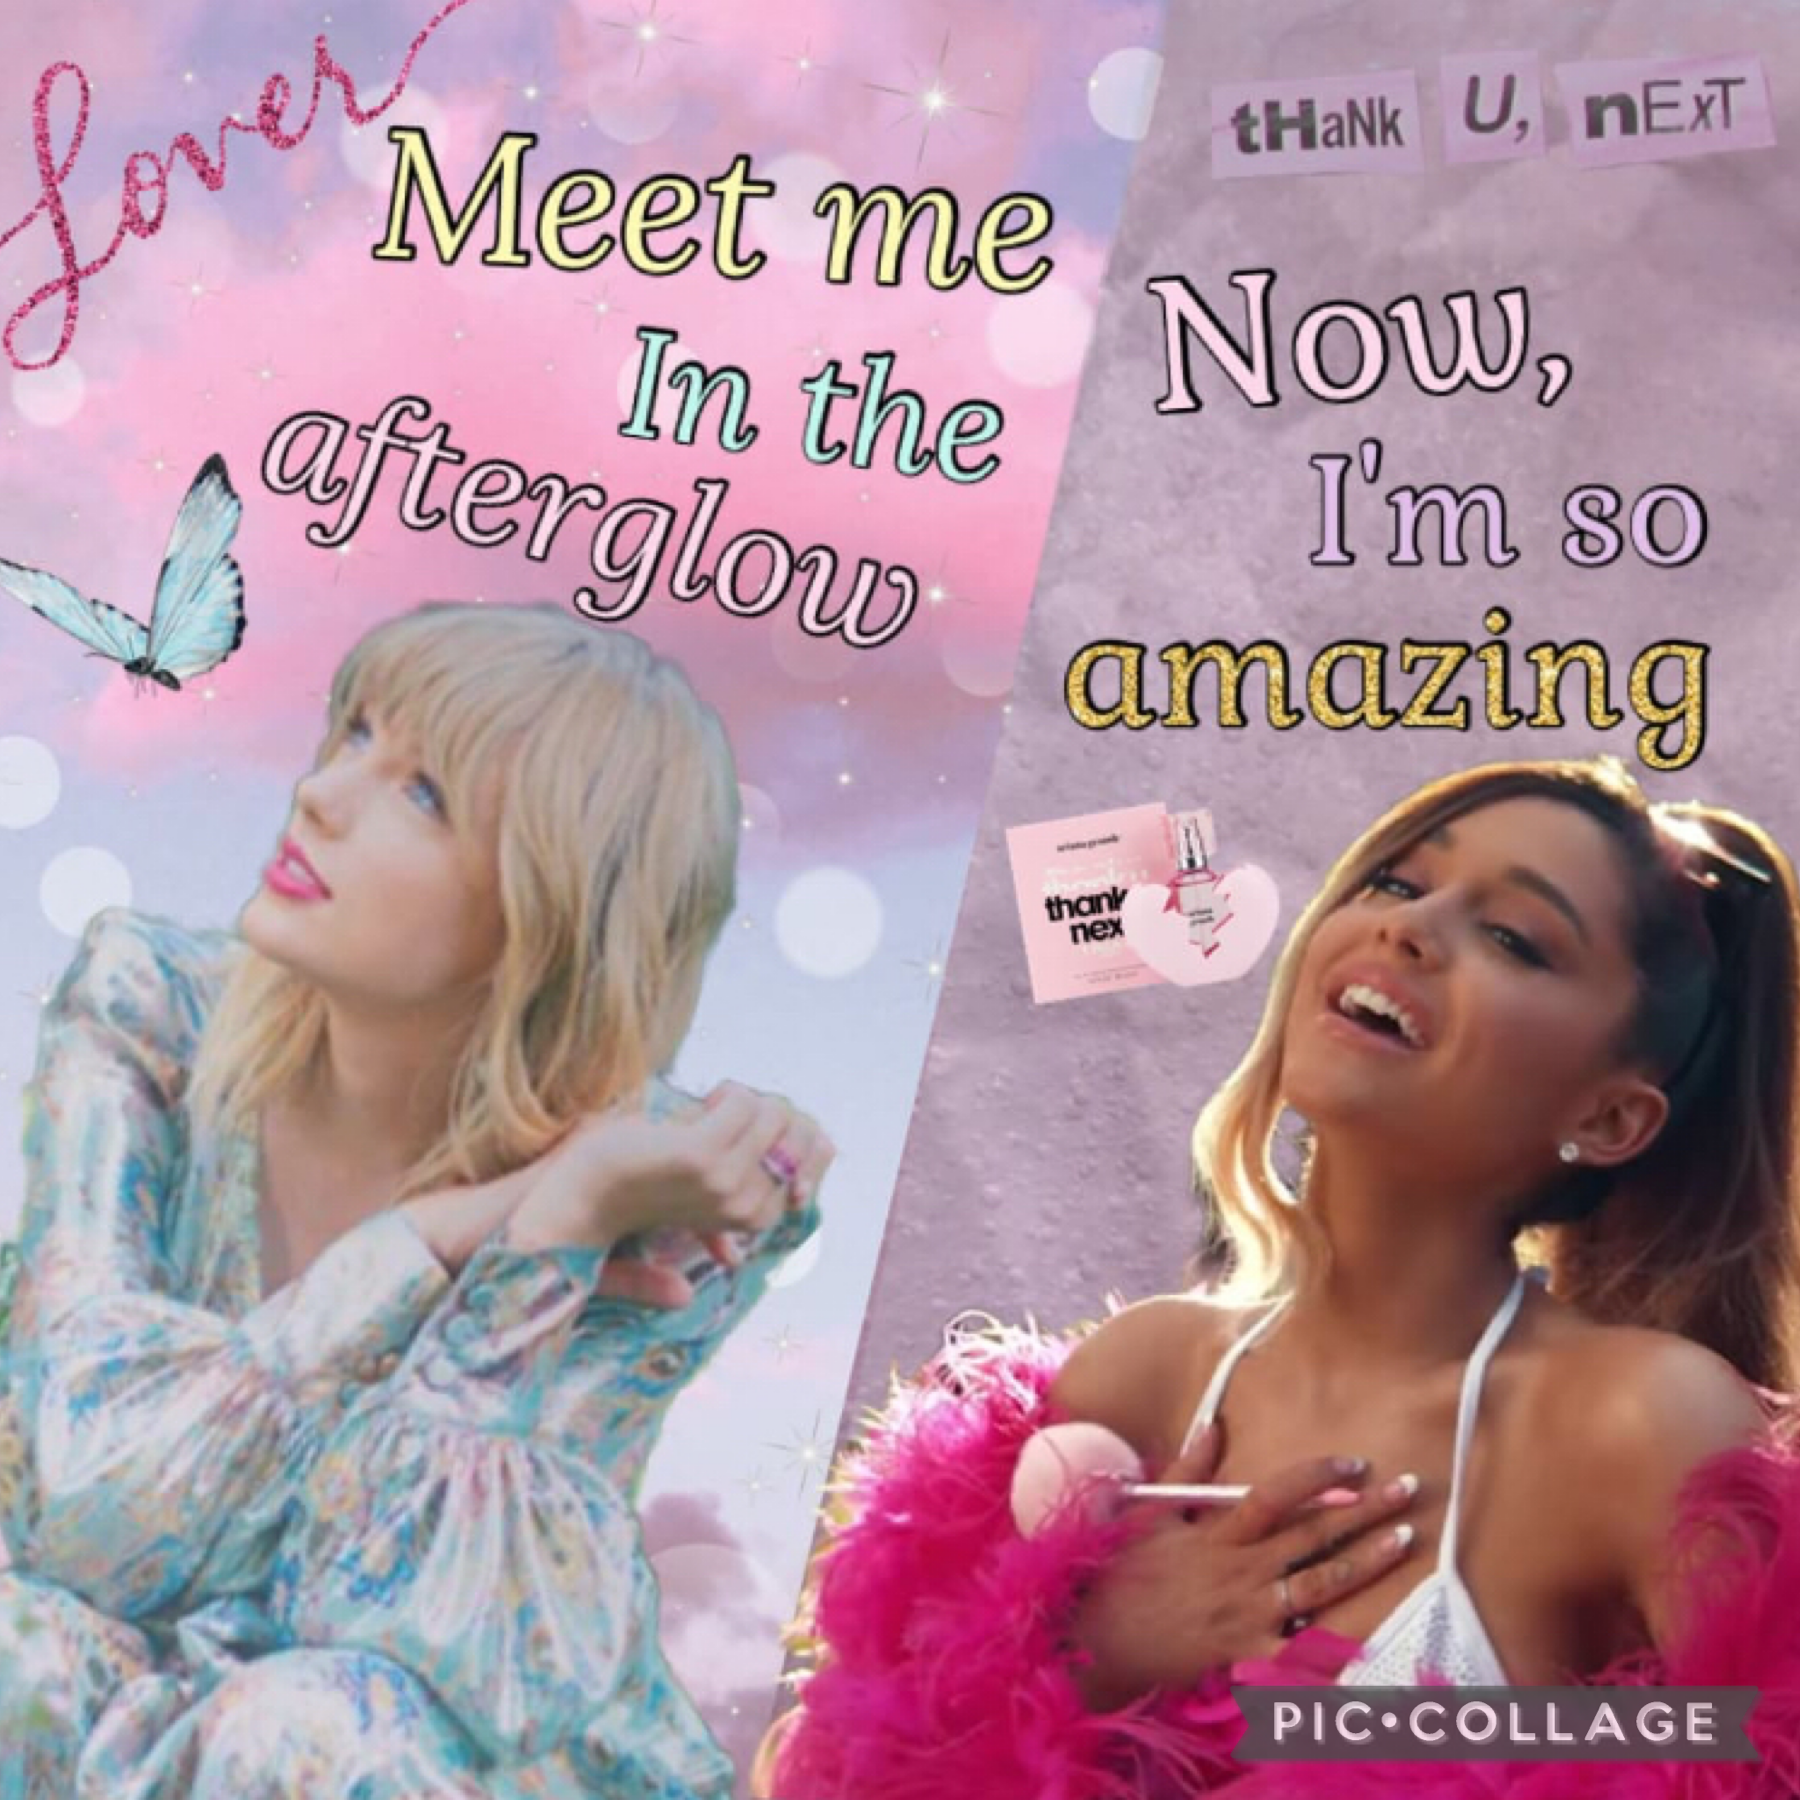 23.12.21 Lover and Thank u next mashup collaboration part 2 with urlocalmanic. Day23 of 24 days 